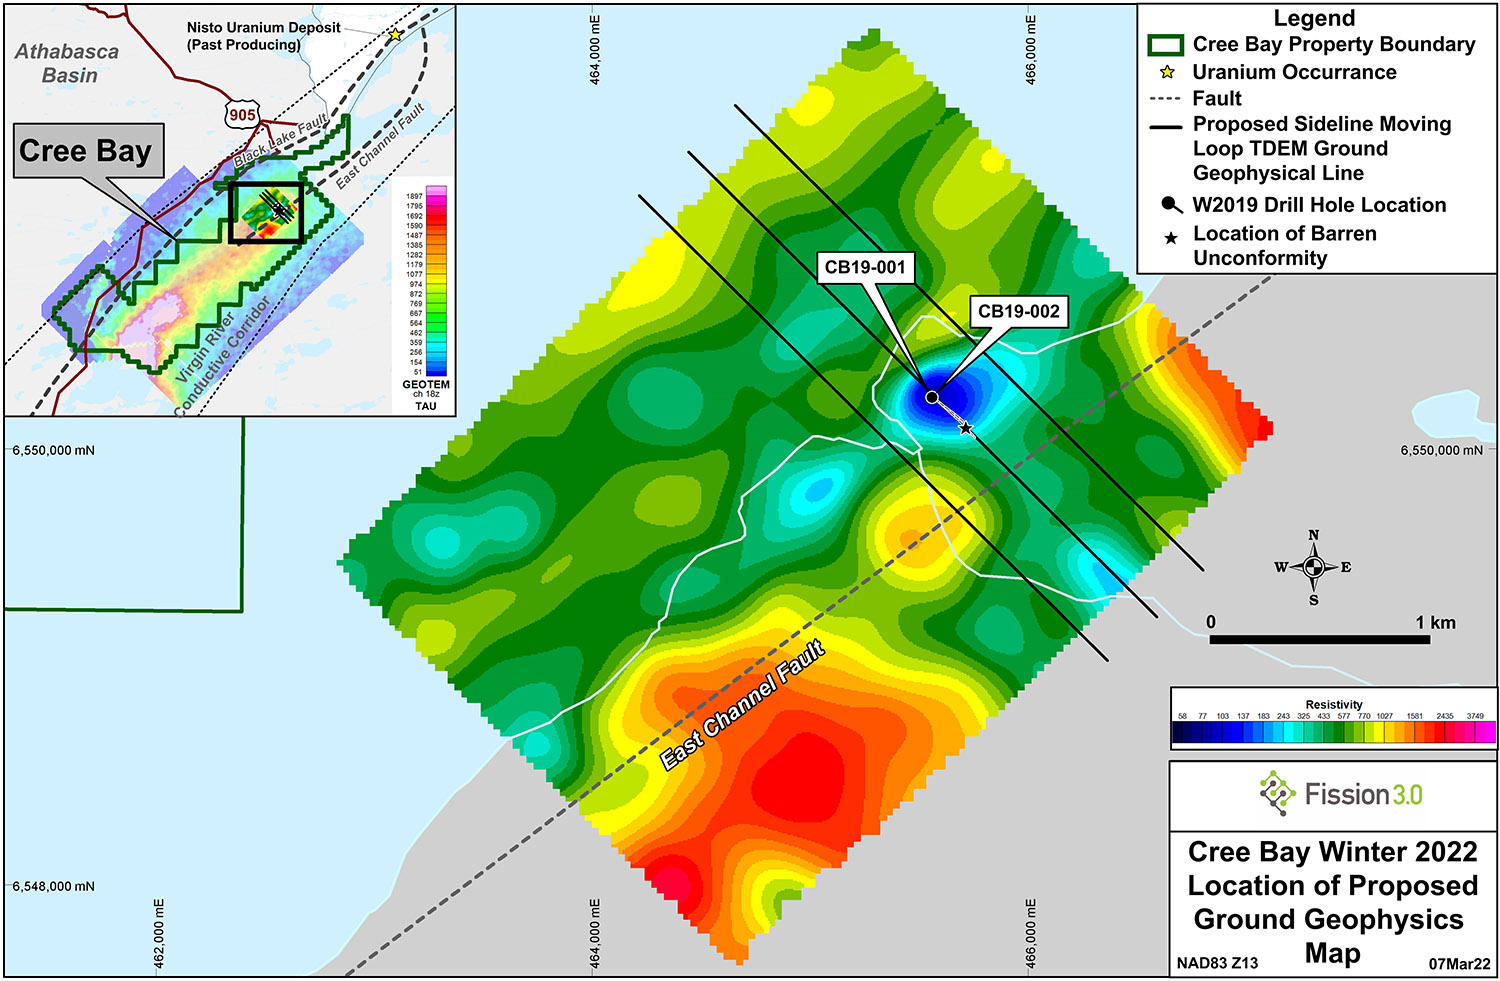 NEW: Cree Bay Proposed Winter 2022 Exploration Ground Geophysics